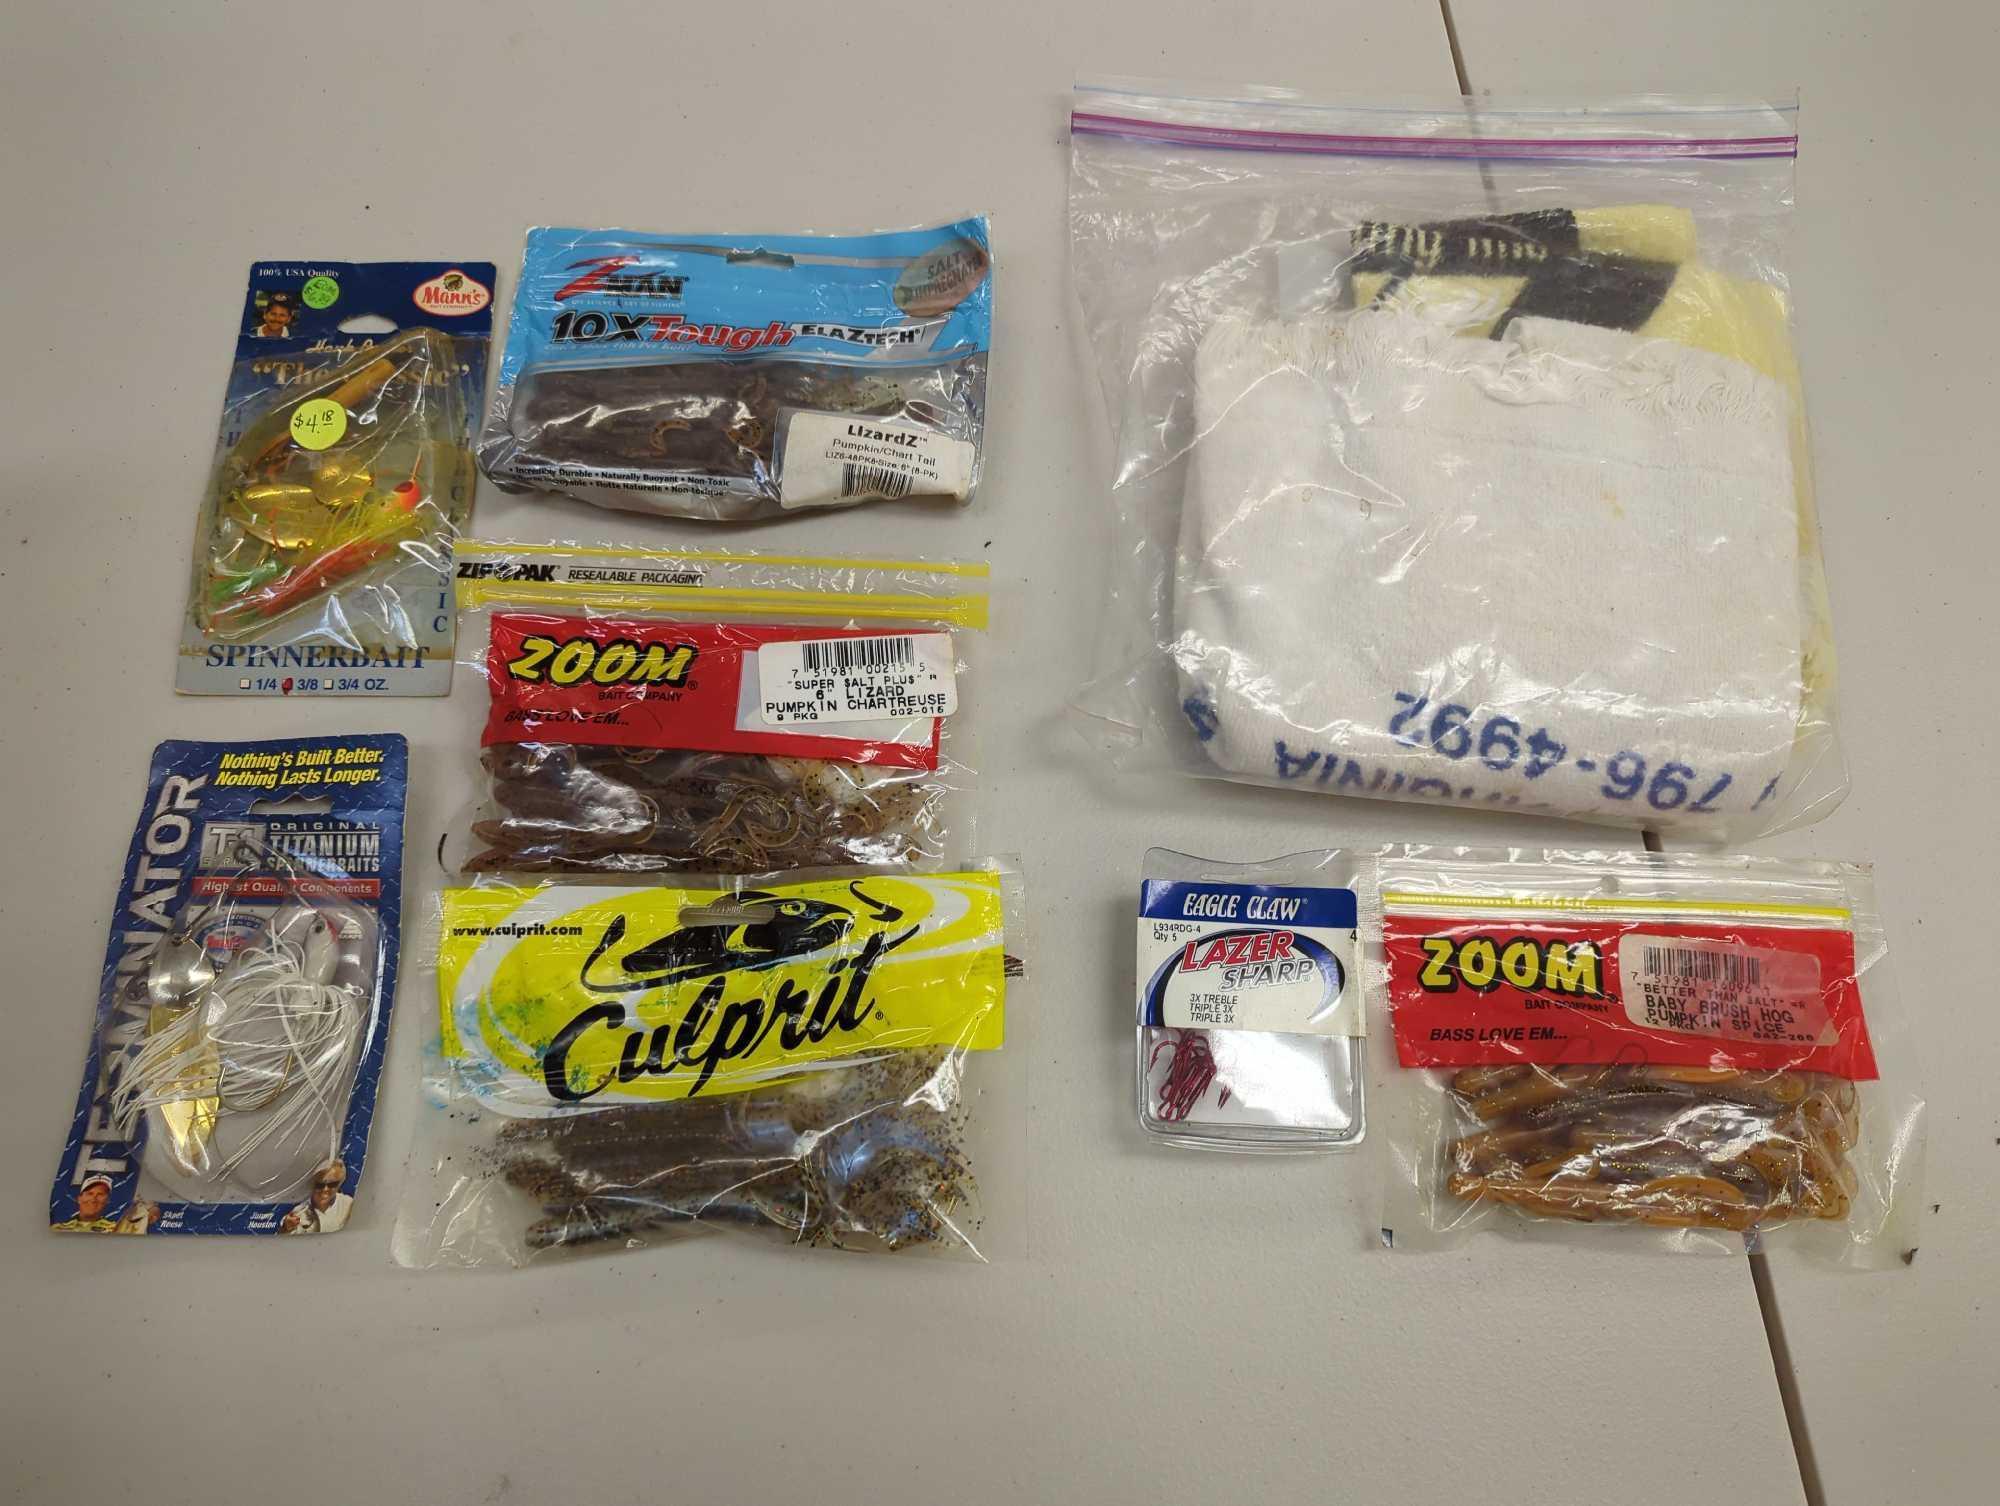 Sterilite organizer tote and contents including worms, other various fishing lures and fishing